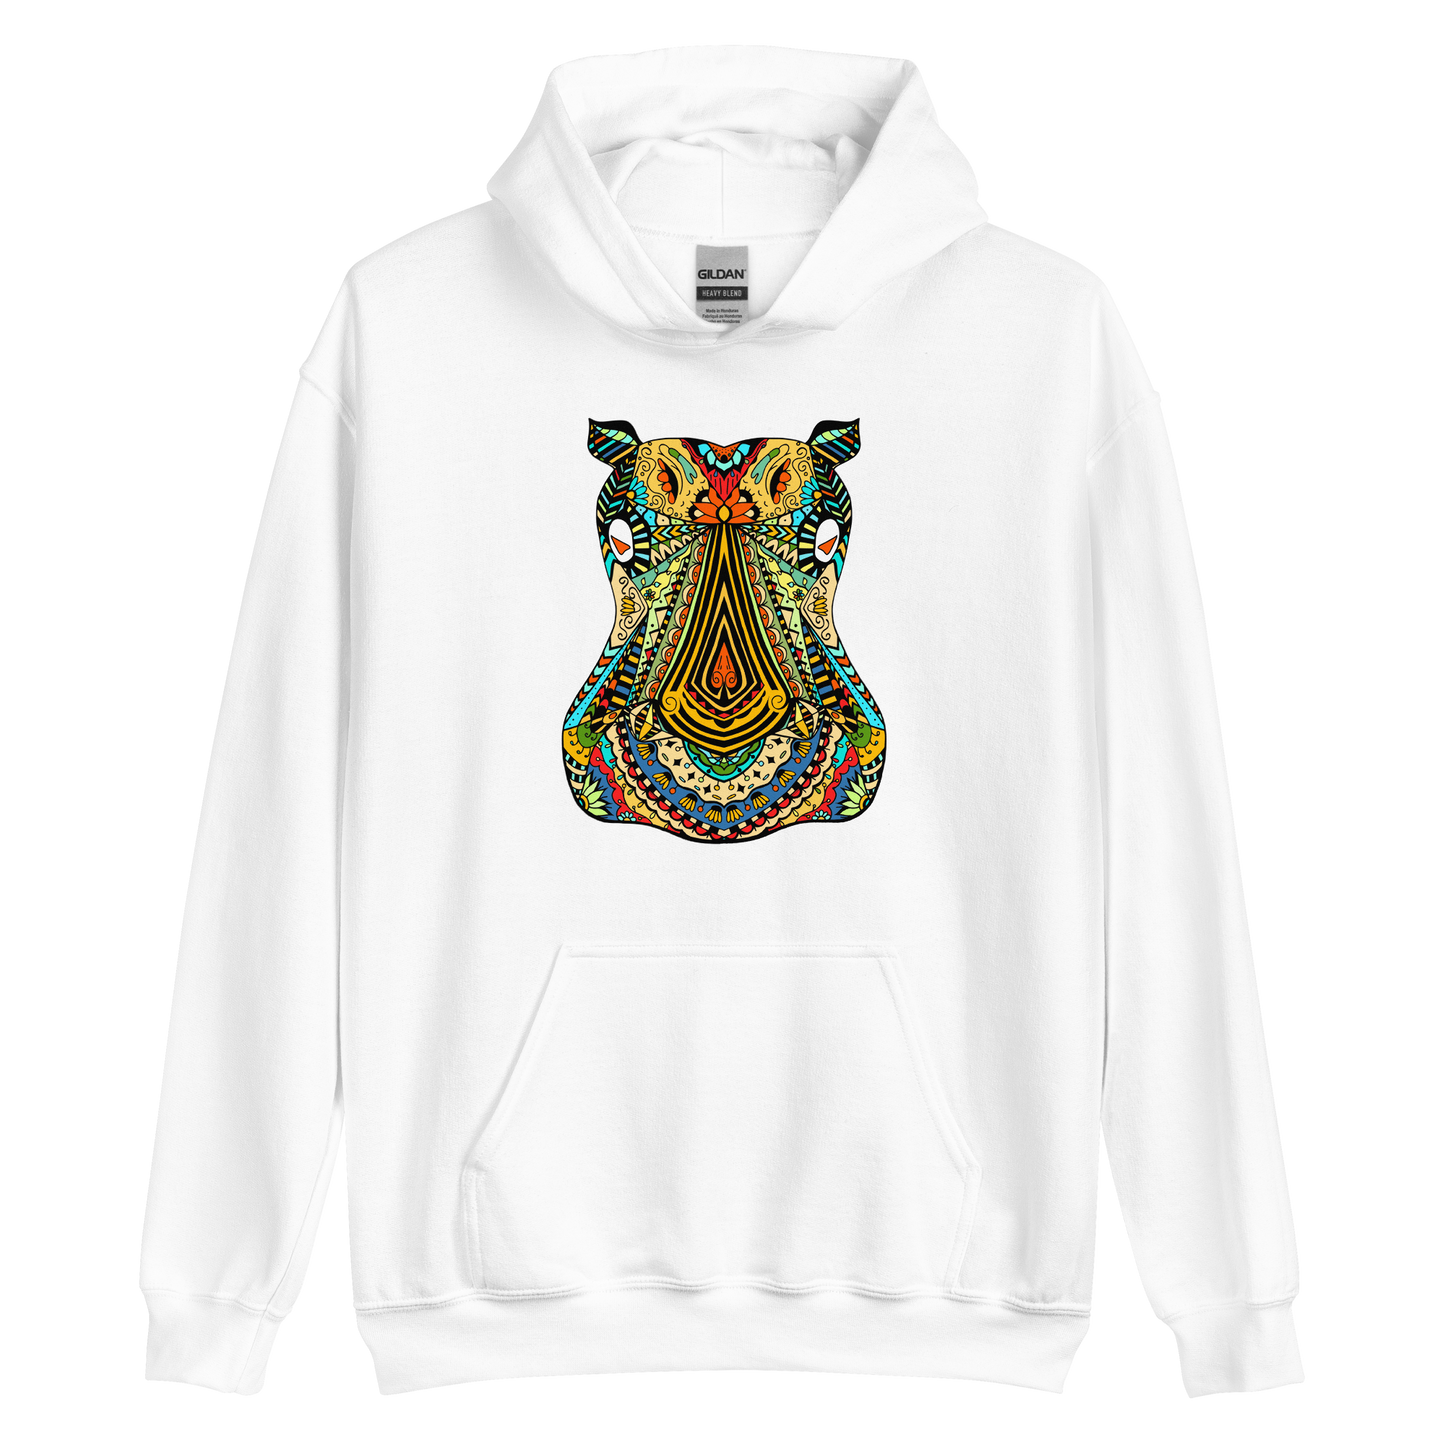 White Hippo Hoodie featuring a captivating Zentangle Hippo graphic on the chest - Cool Graphic Hippo Hoodies - Boozy Fox